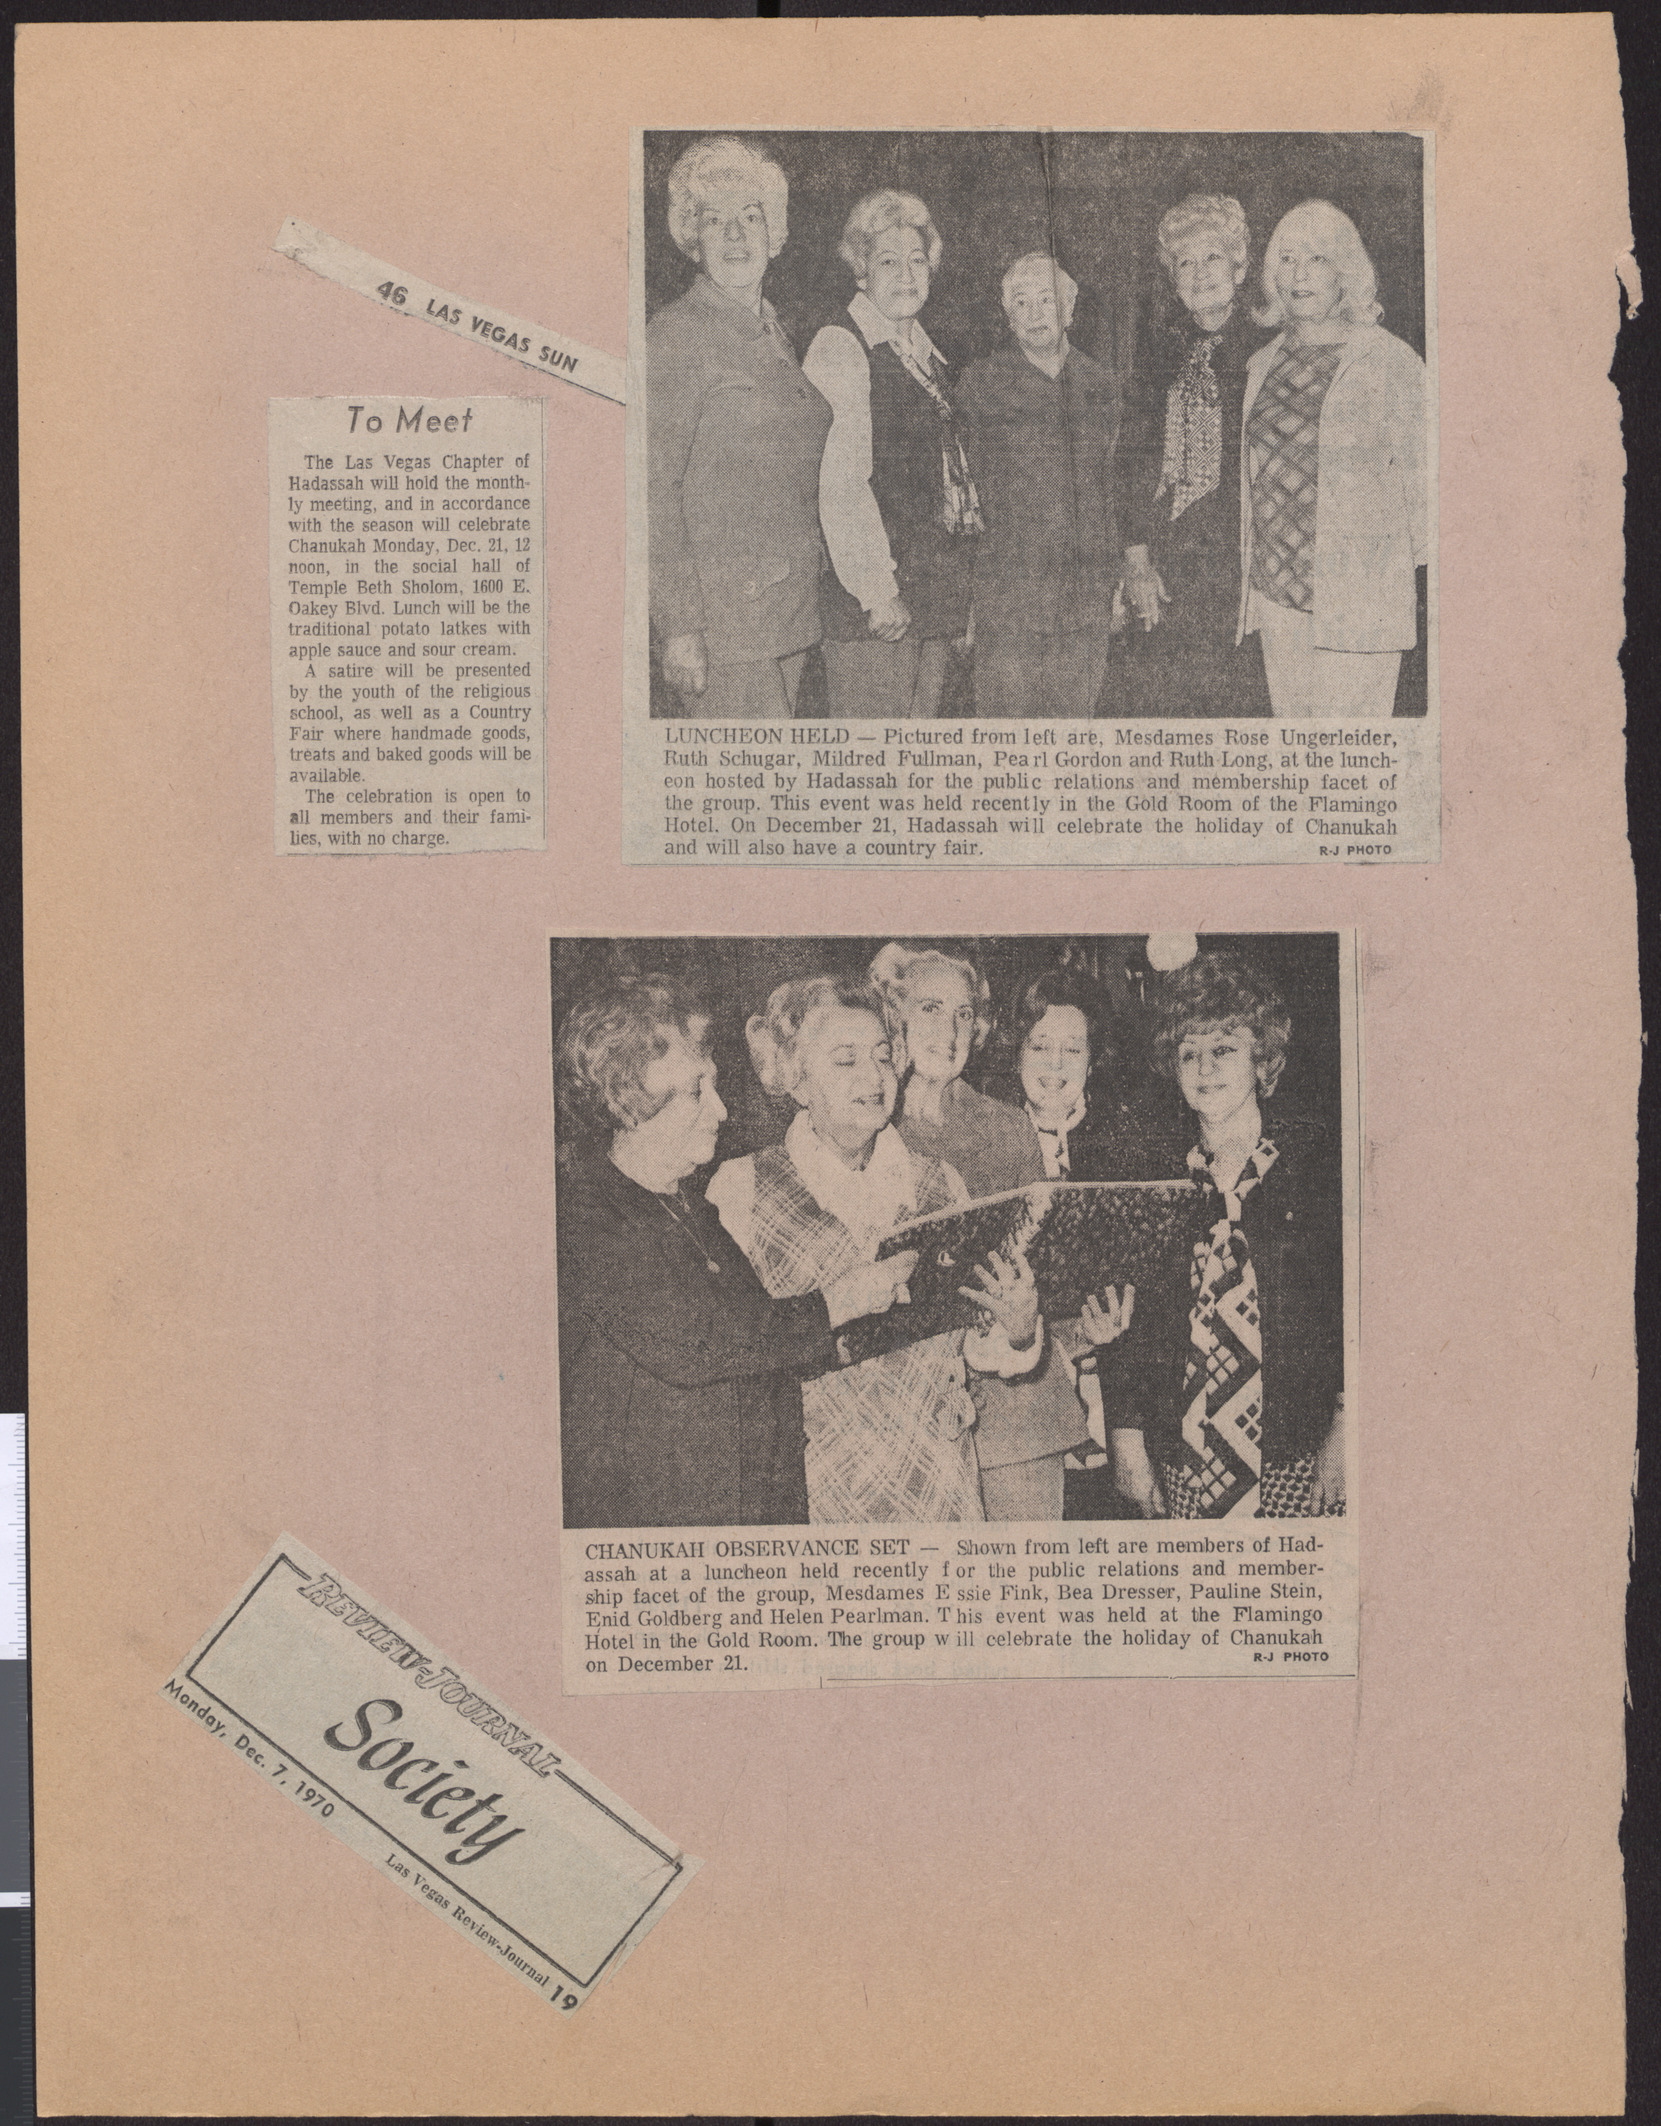 Newspaper clippings about Hadassah meetings and holiday events, December 1970